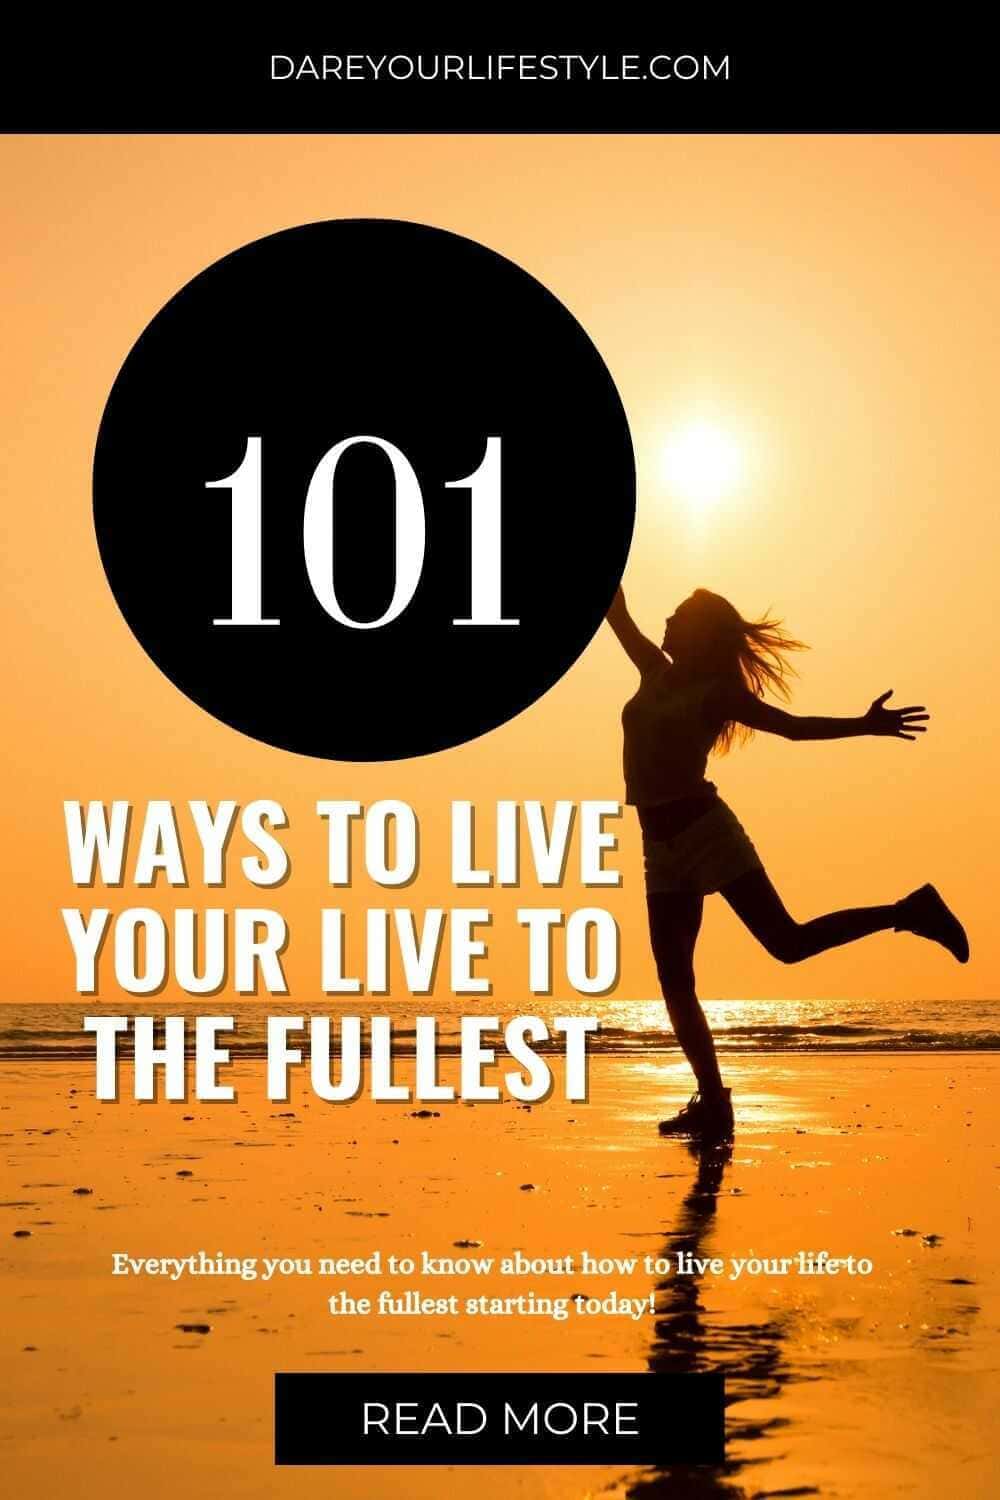 101 ways to live life to the fullest